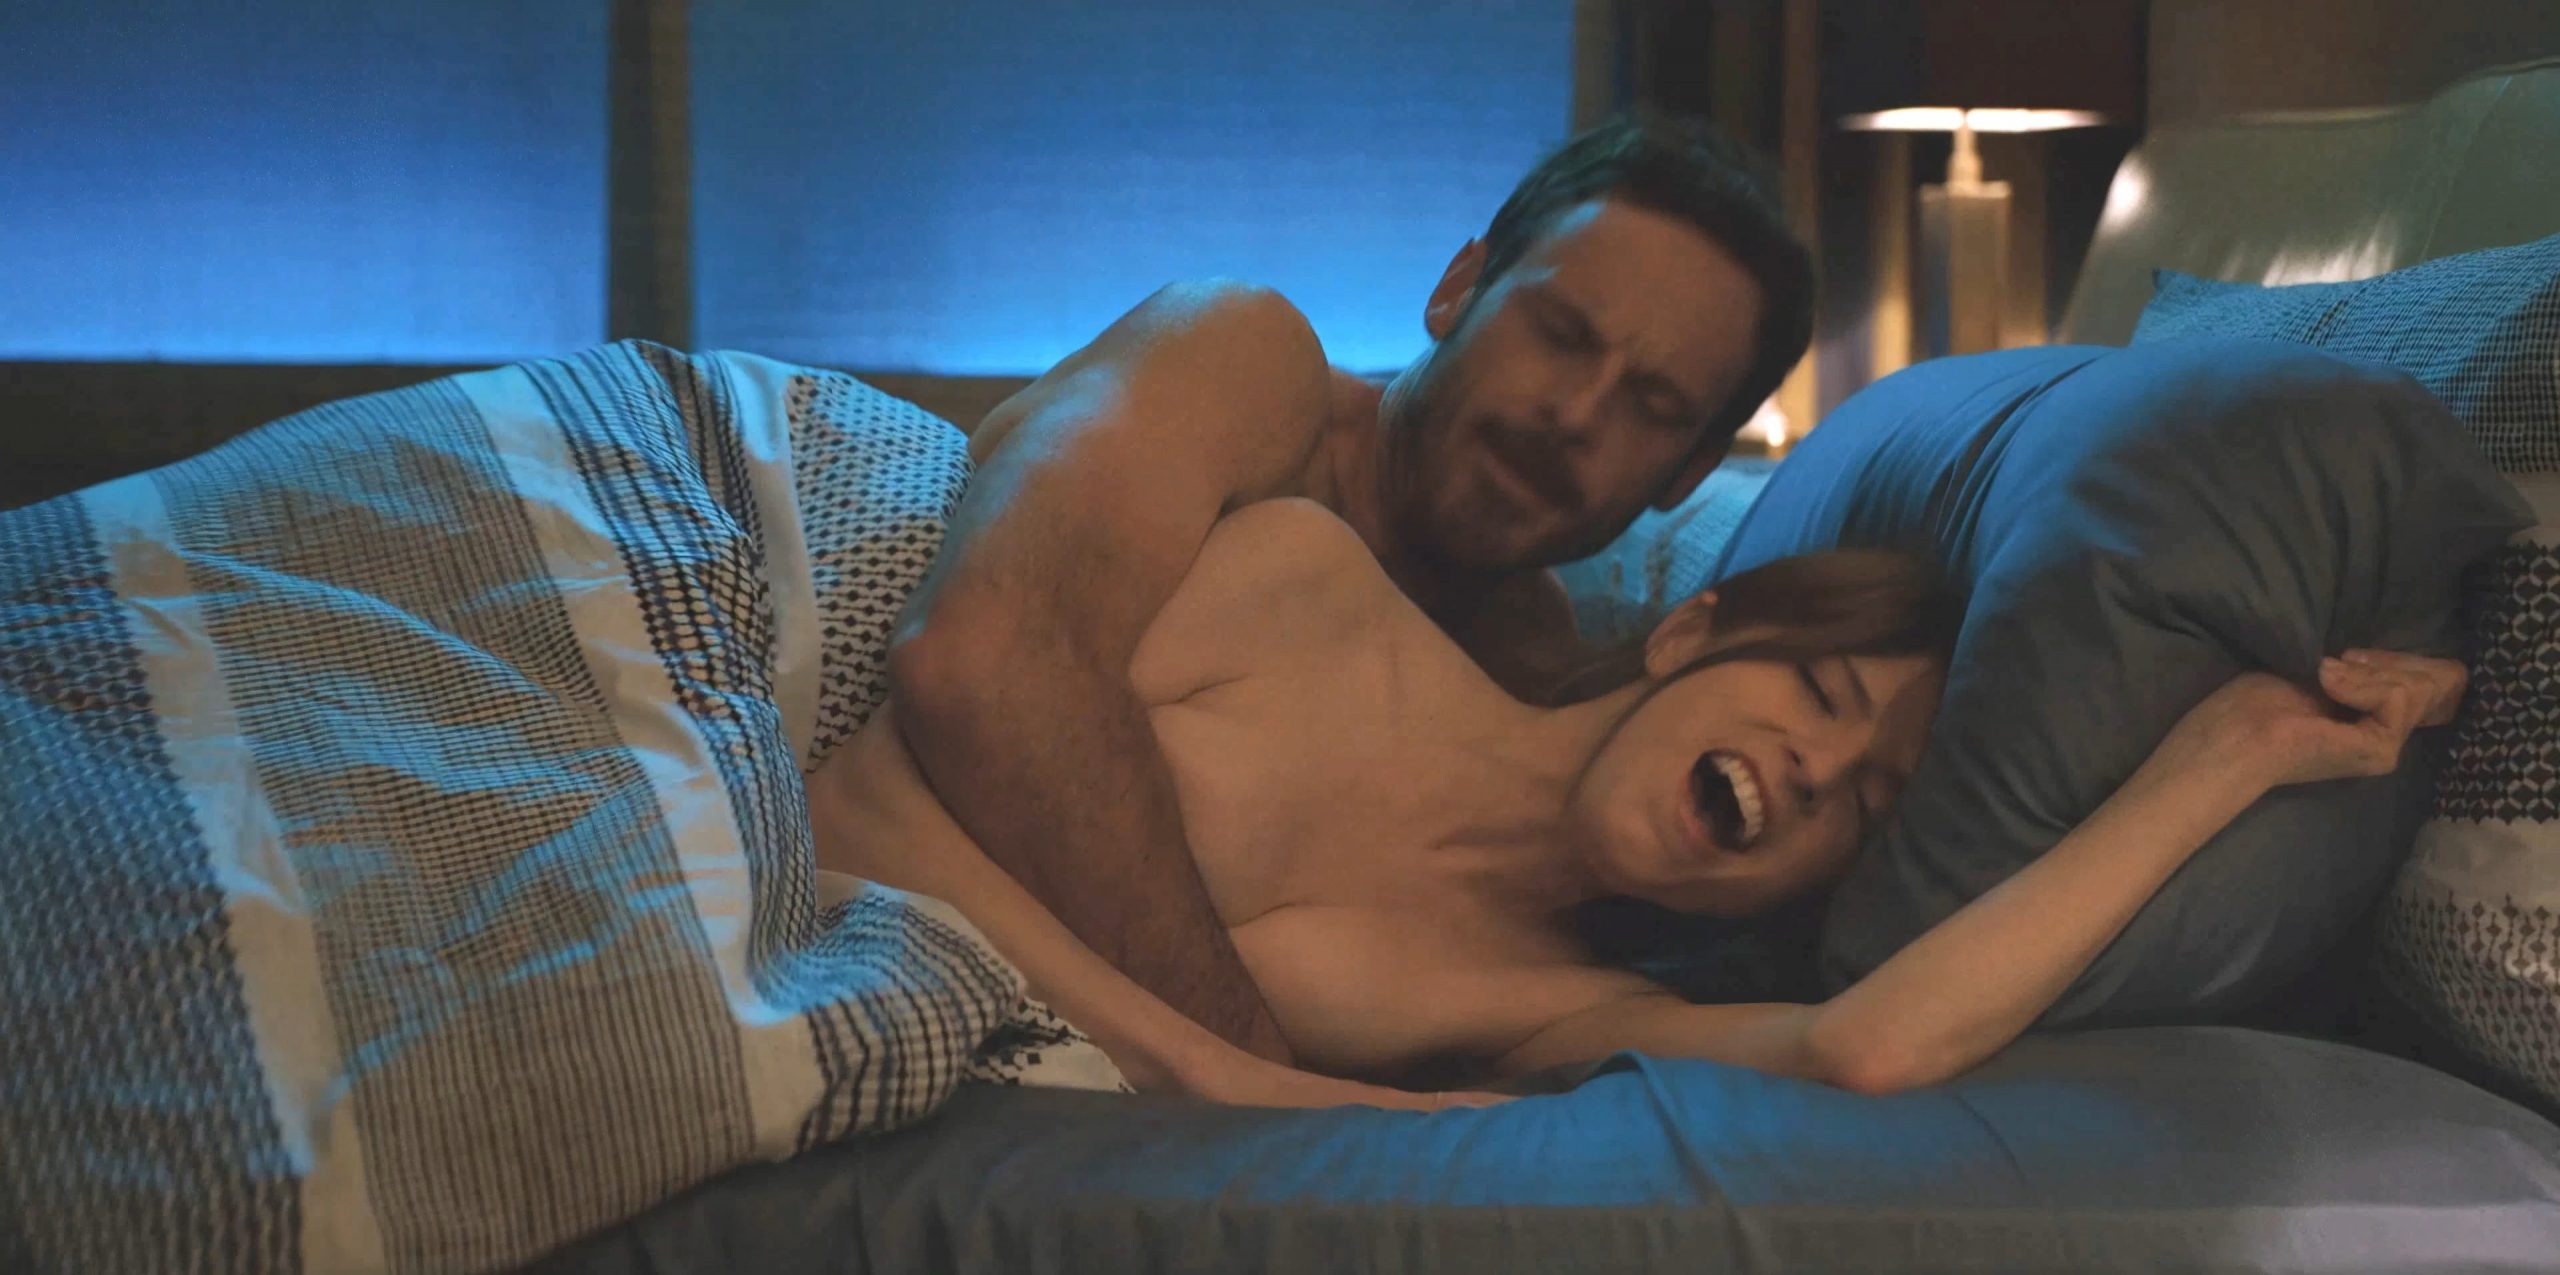 Anna Kendrick Nude In Love Life TheFappening Pro 2 - Anna Kendrick Nude (8 New Pics + Video)